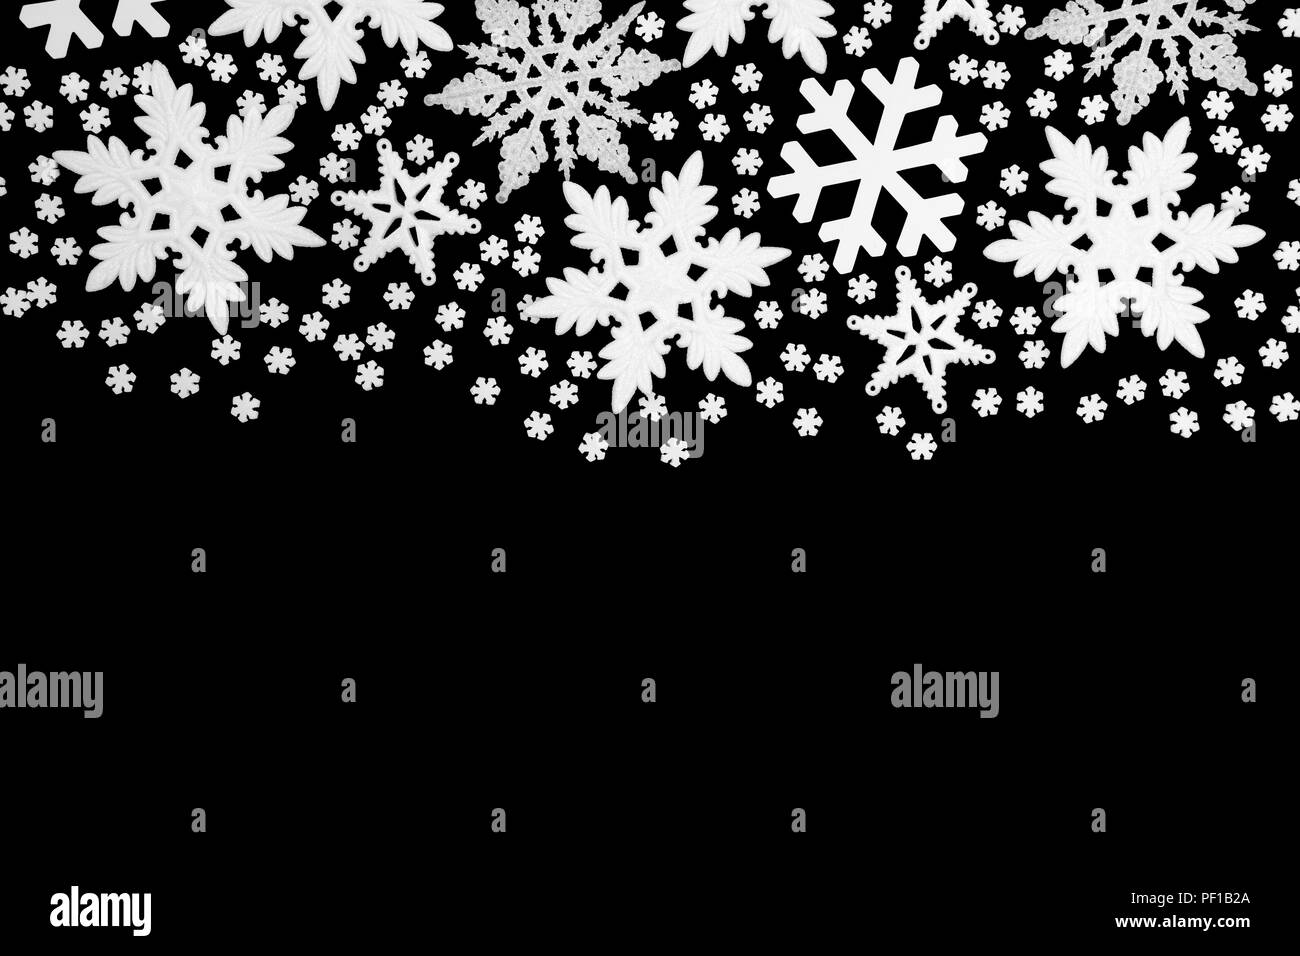 Snowflake christmas and winter abstract background border on black with copy space. Stock Photo